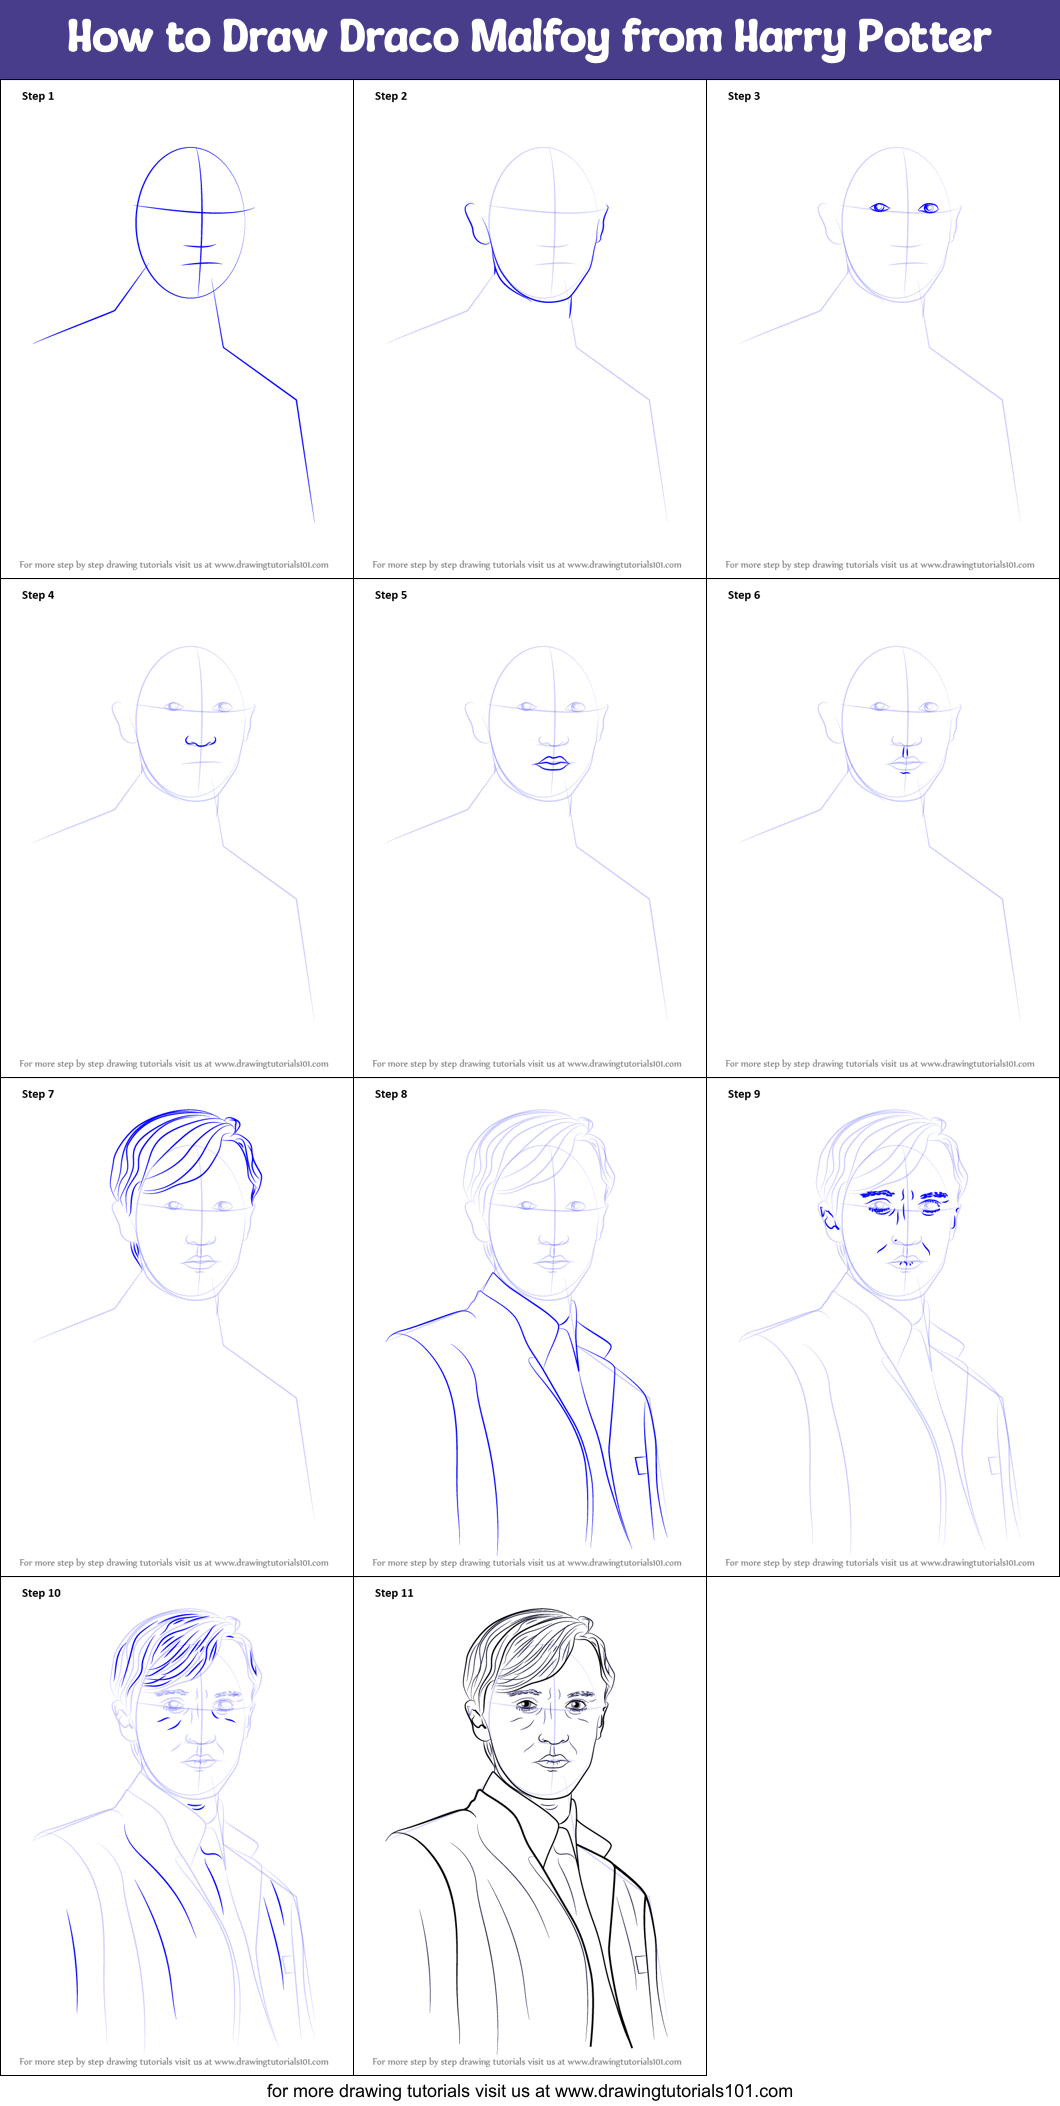 How To Draw Draco Malfoy From Harry Potter Printable Step By Step Drawing Sheet Drawingtutorials101 Com